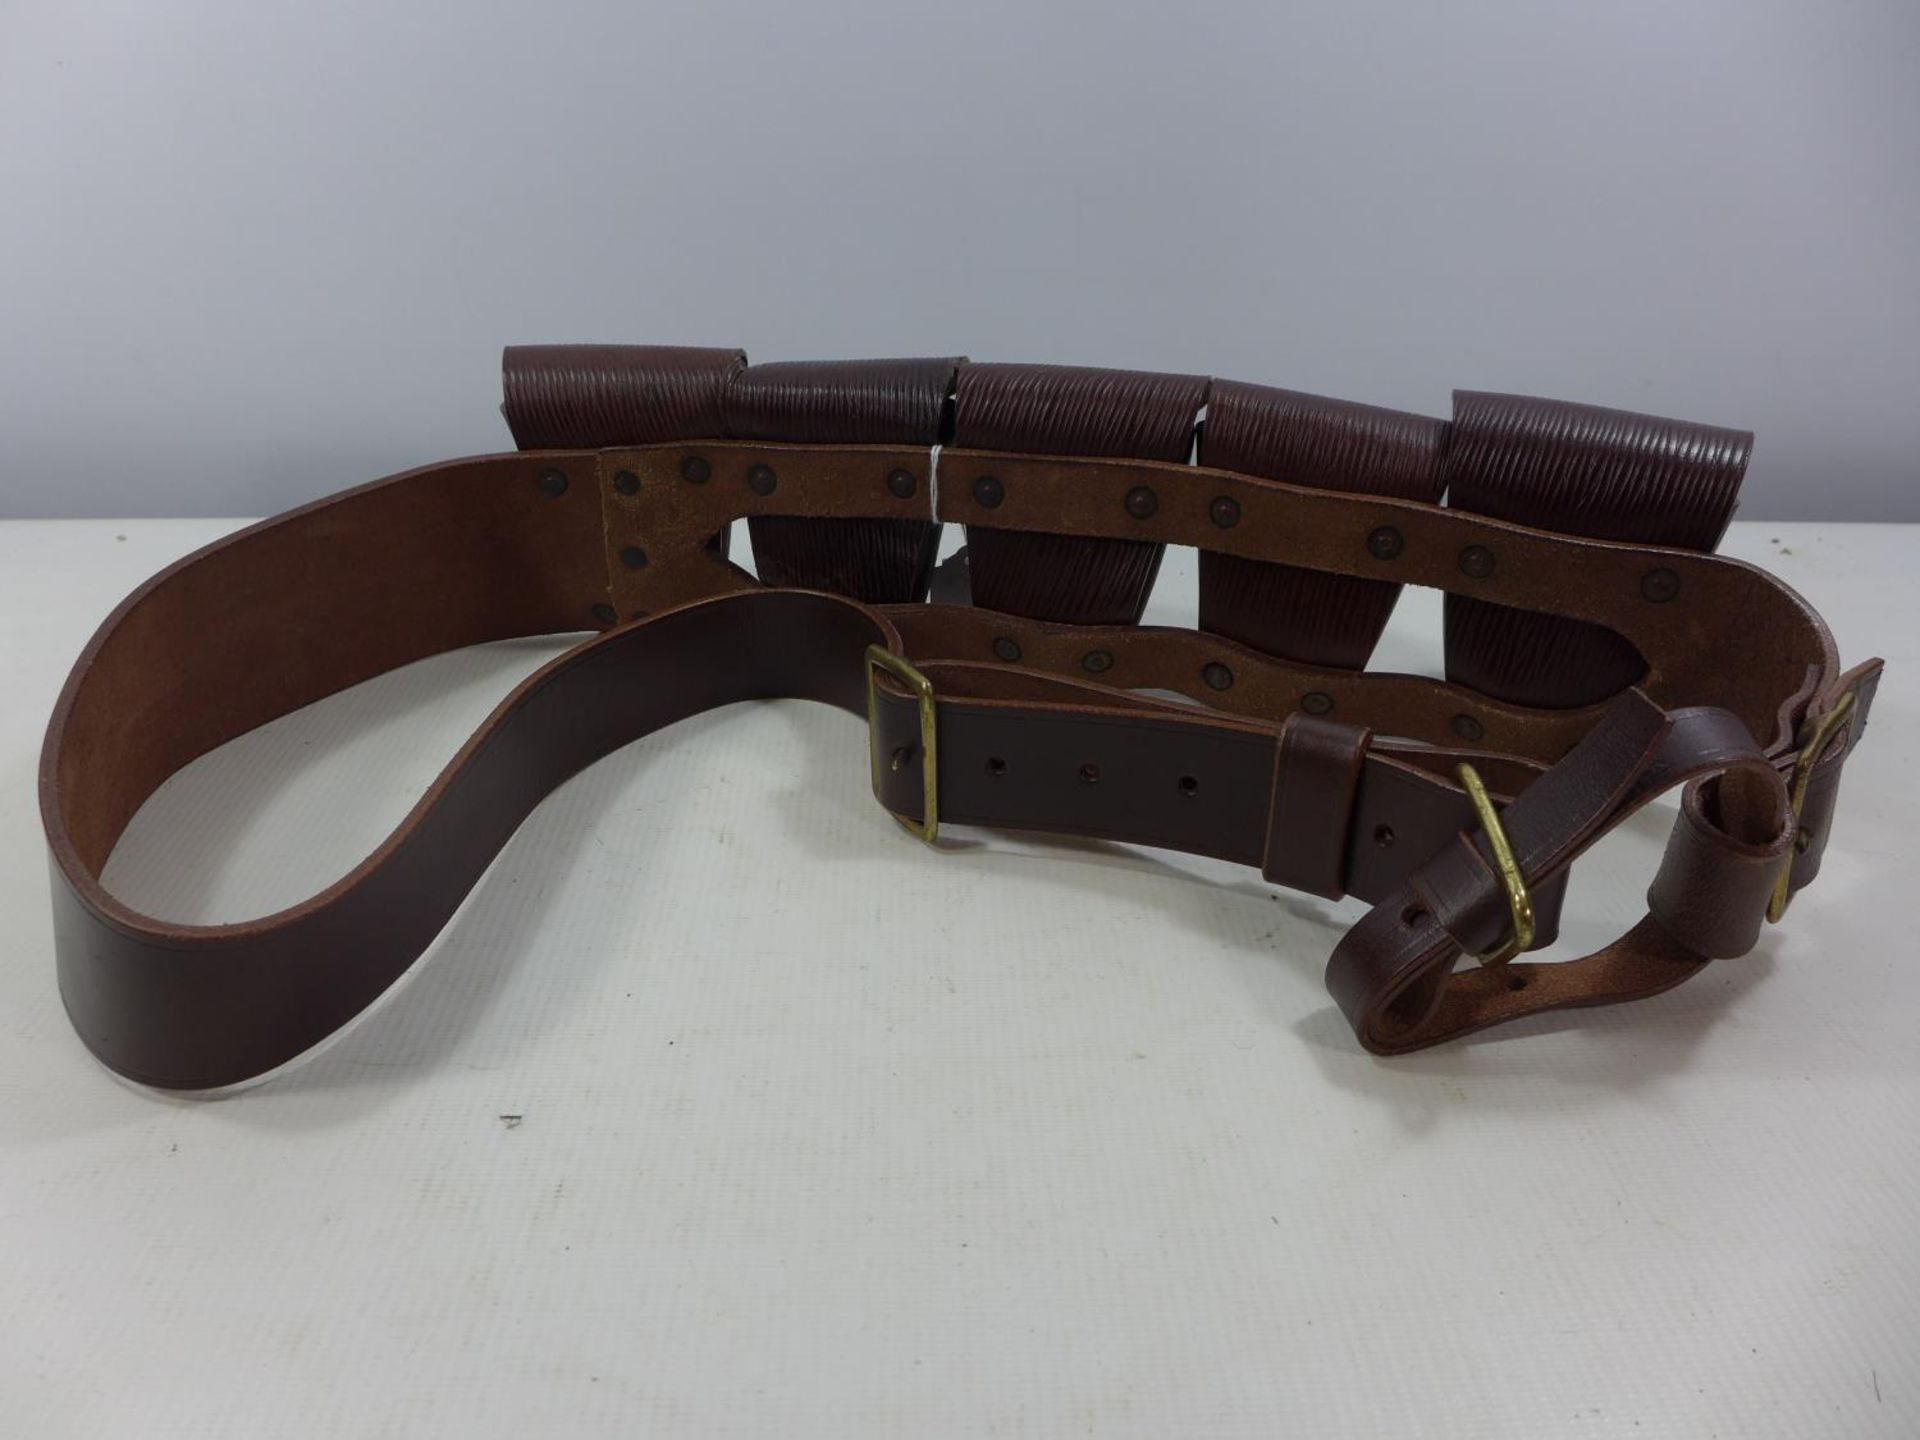 A LEATHER FIVE SECTION CARTRIDGE BELT - Image 3 of 3